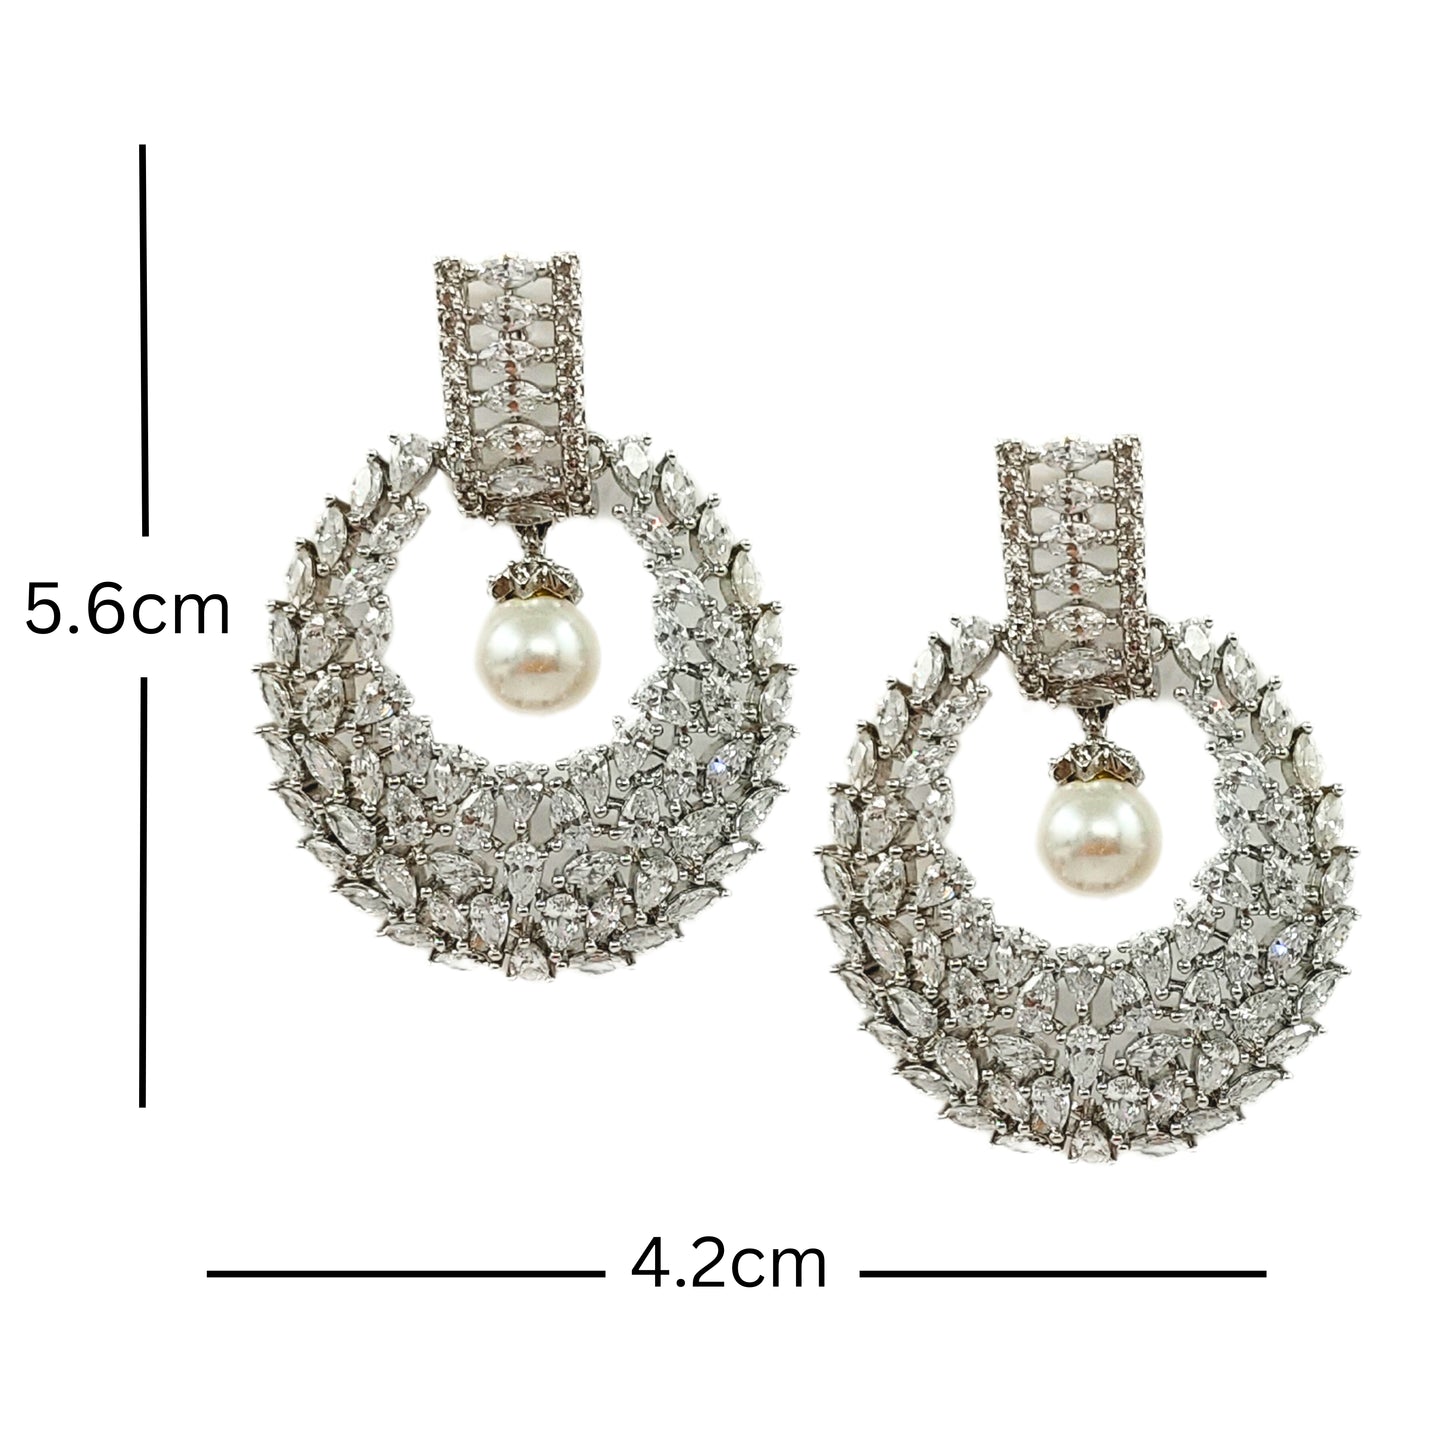 Bdiva Rhodium Plated Cubic Zirconia and Pearl Statement Earrings